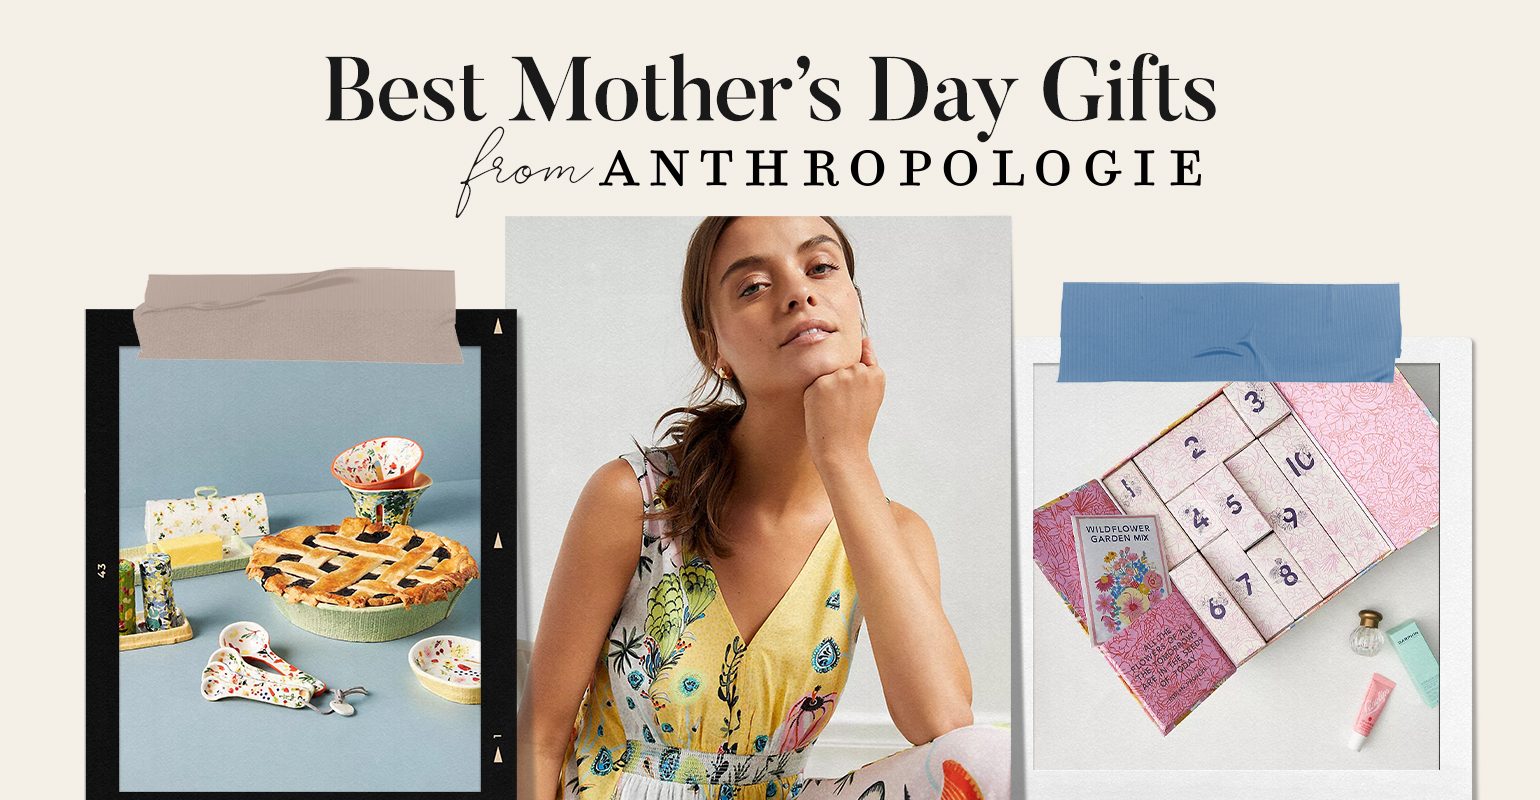 Best Mother's Day Gifts from Anthropologie